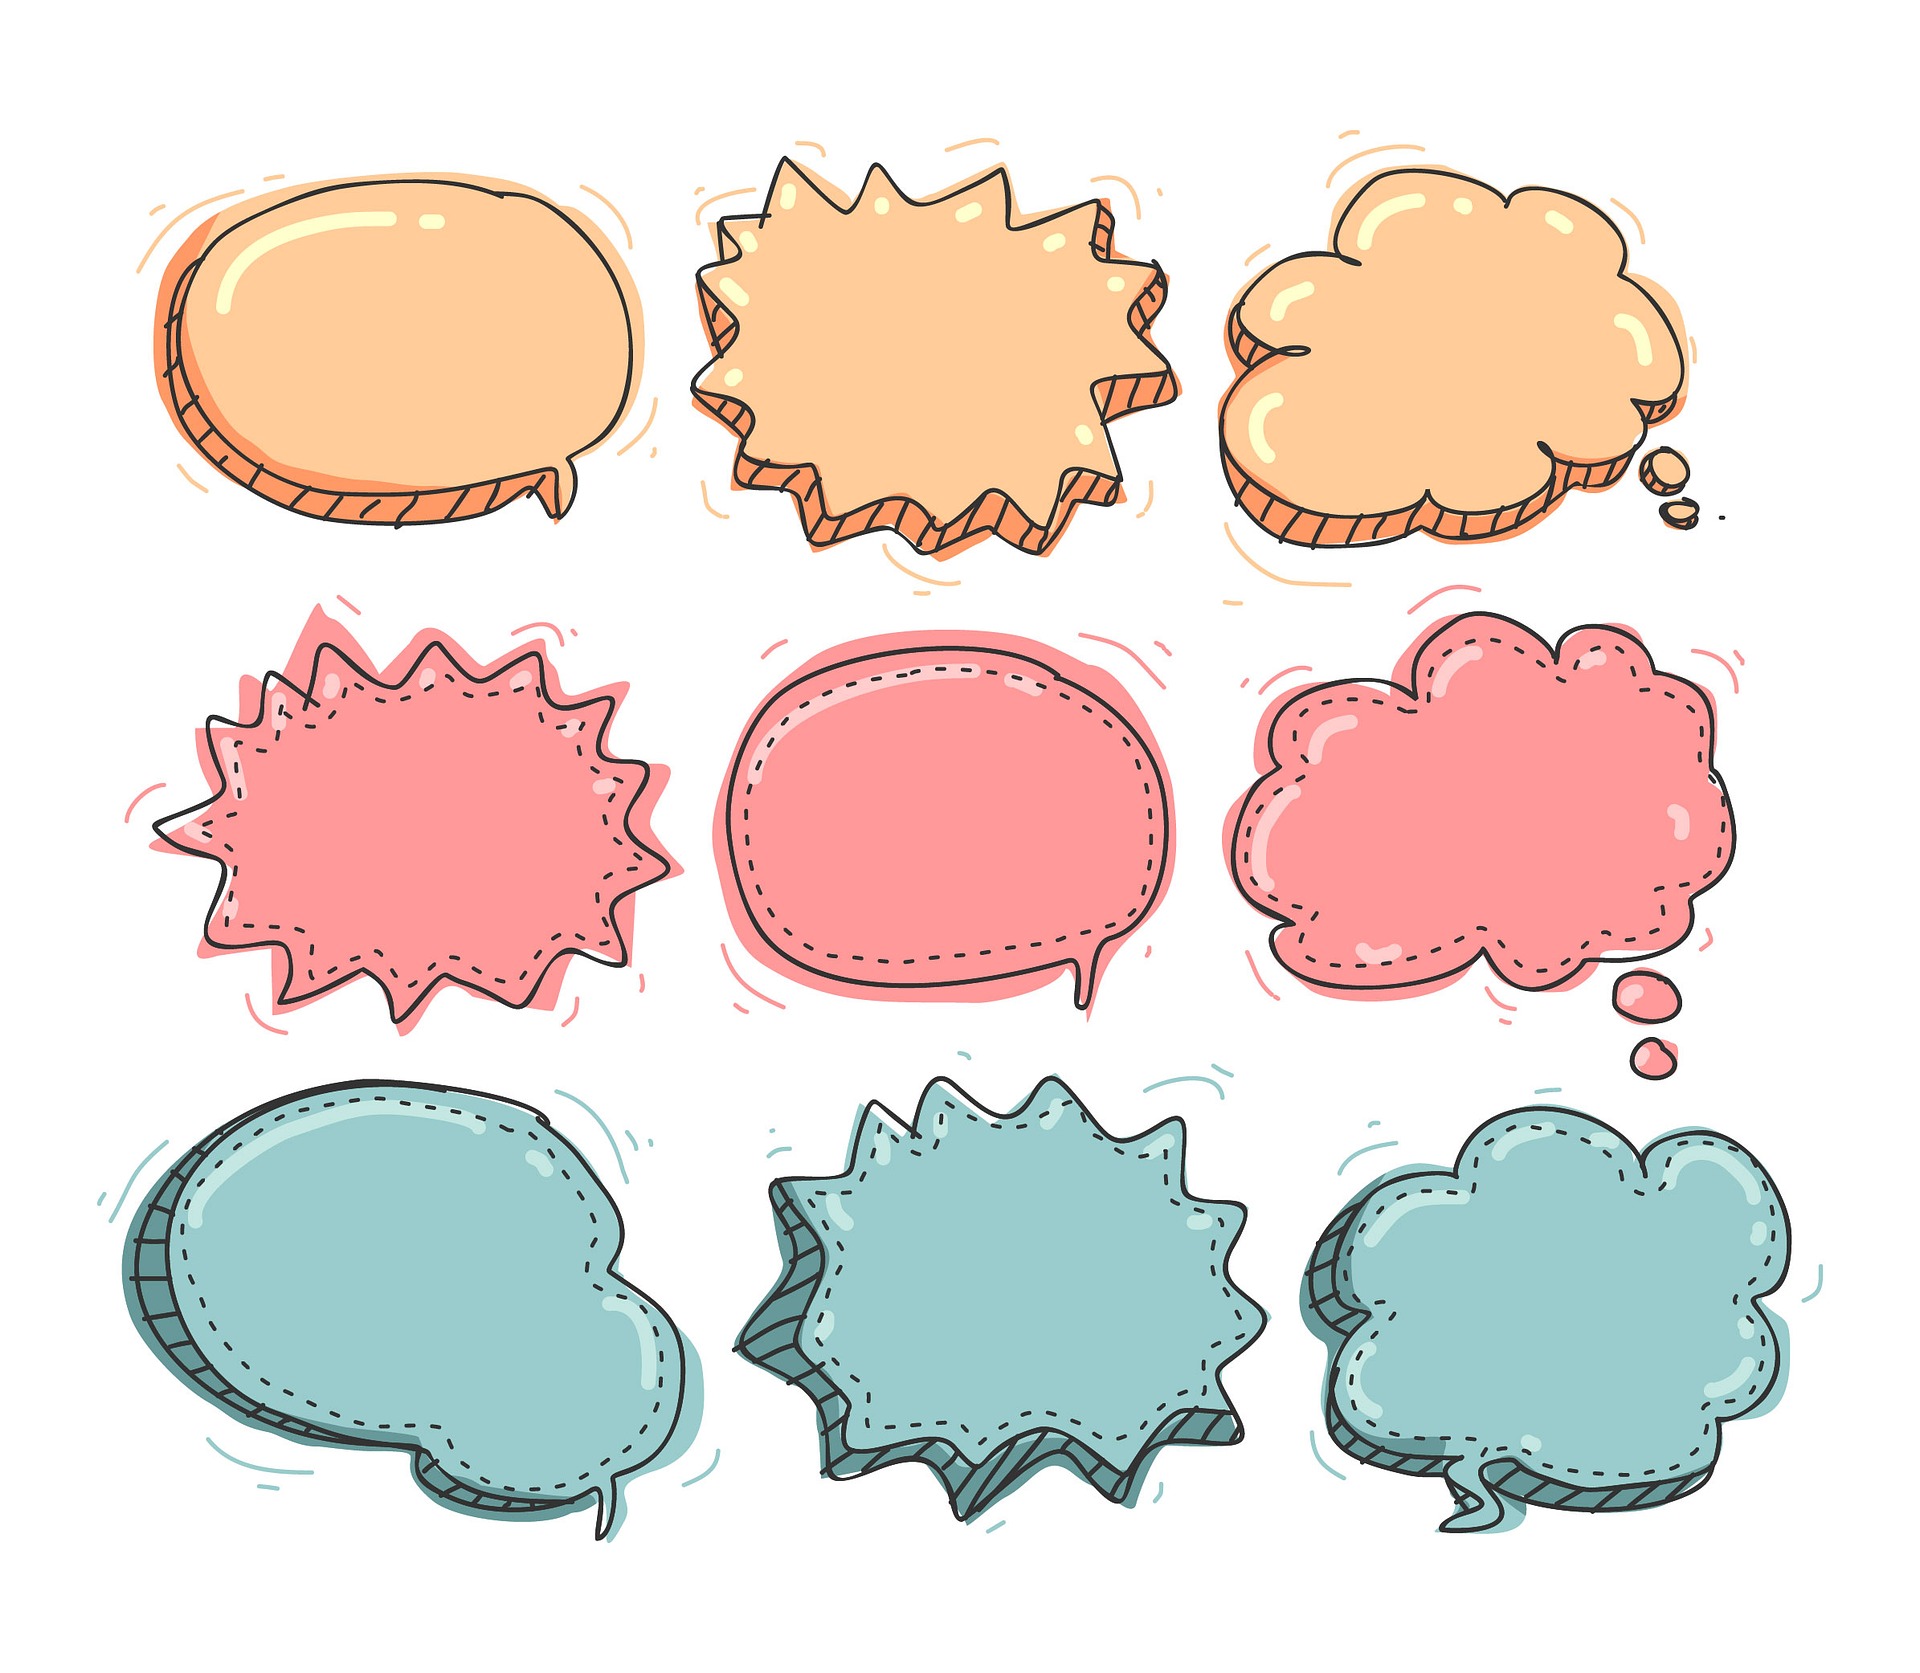 9 different conversation bubbles in different shapes and sizes.